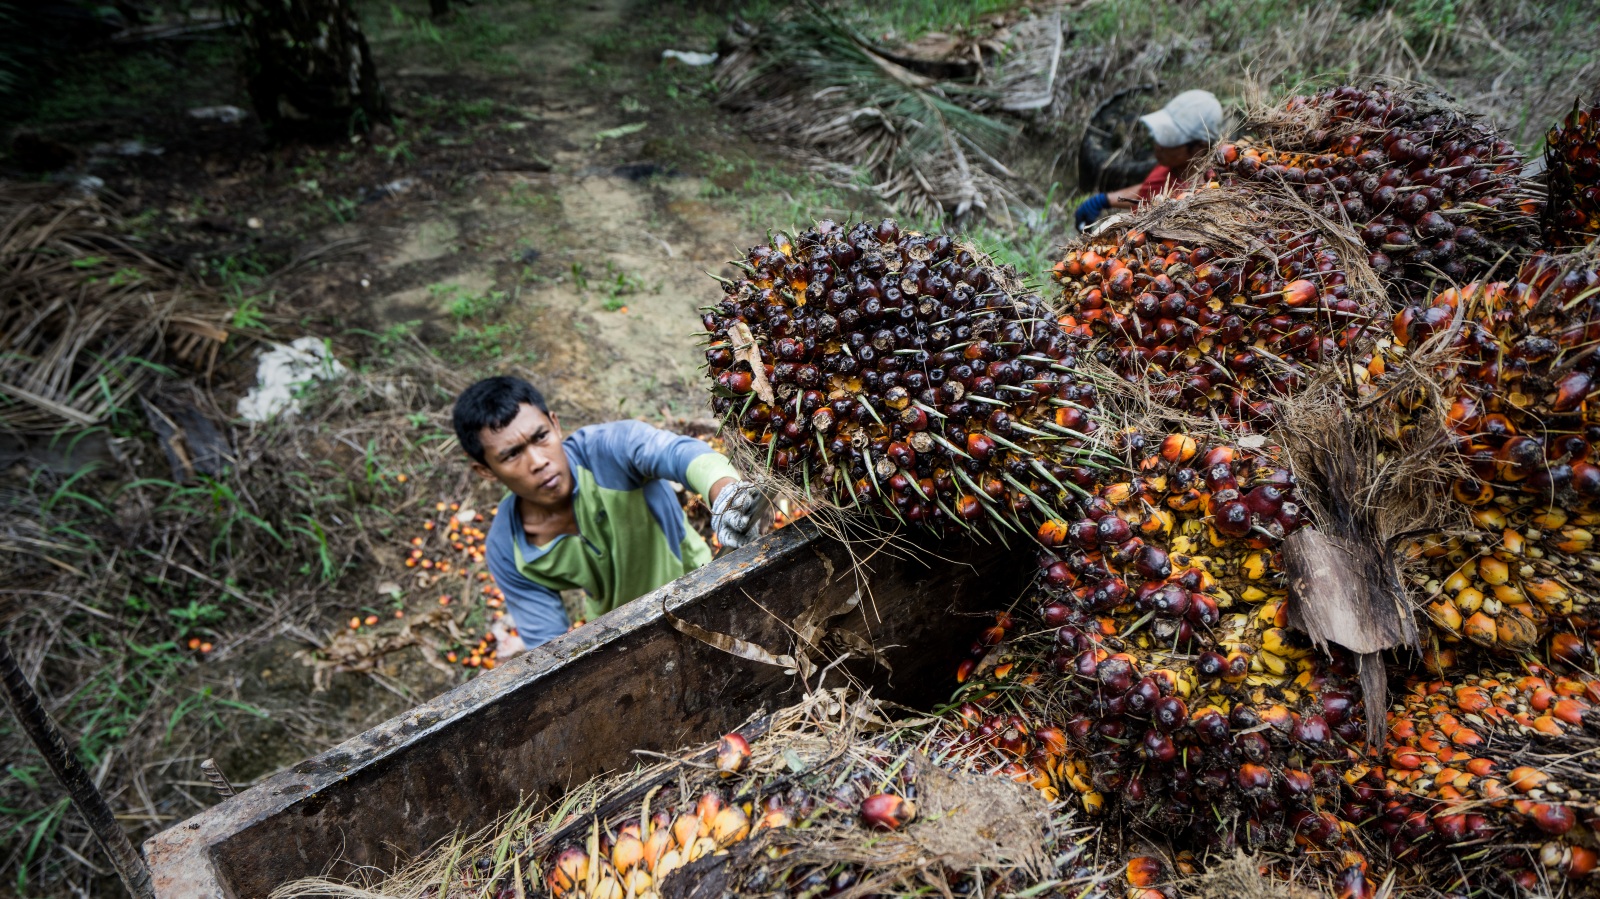 EU agrees to ban products linked to deforestation